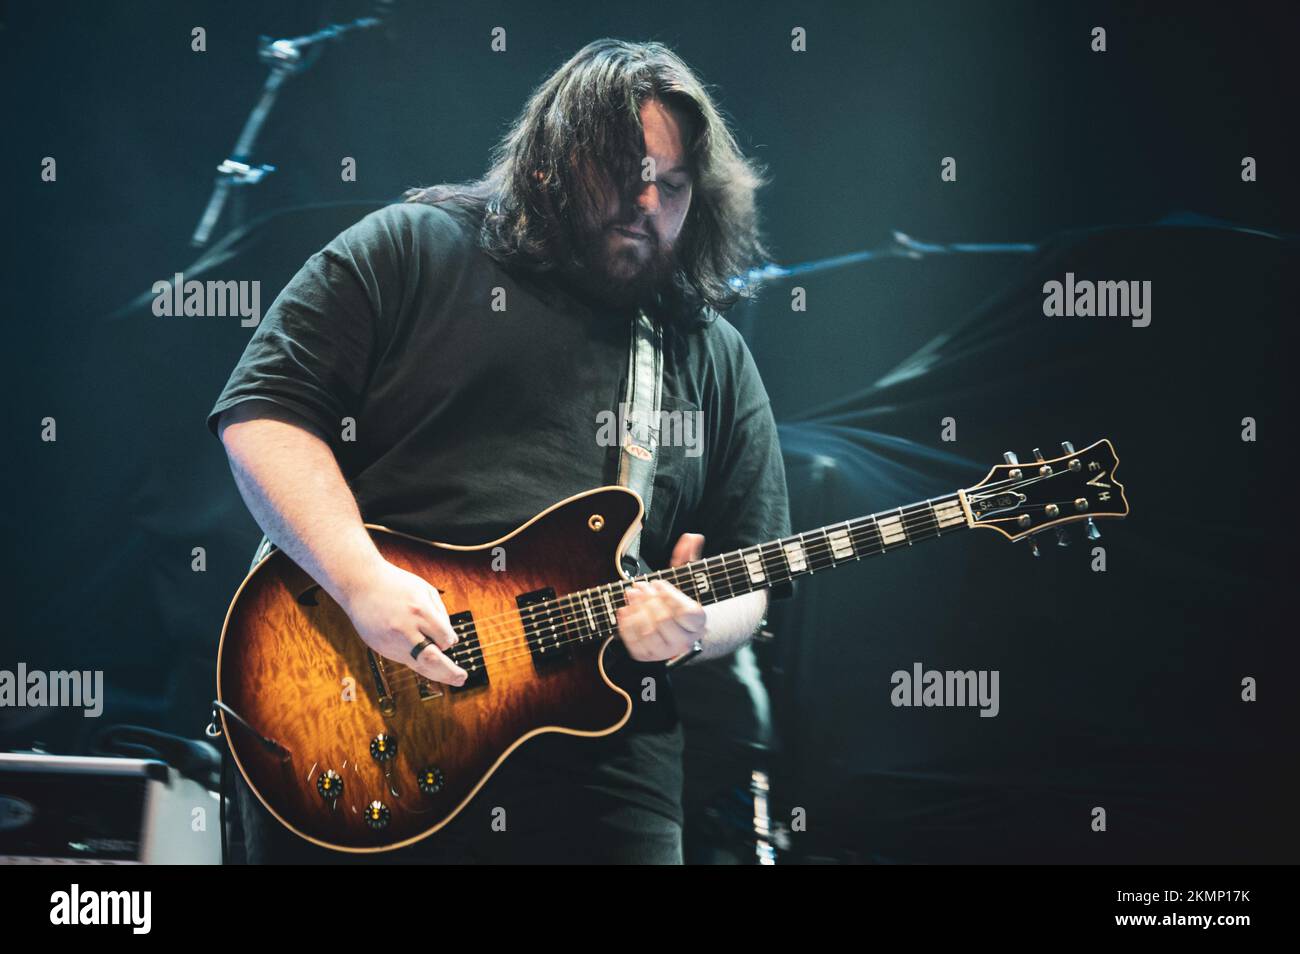 ITALY, MILAN, NOVEMBER 25TH 2022: The American musician, singer and composer Wolfgang Van Halen (better known as Mammoth WVH), performing live on stage in Milan, opening for the Alter Bridge “Pawns & Kings” European tour. Stock Photo